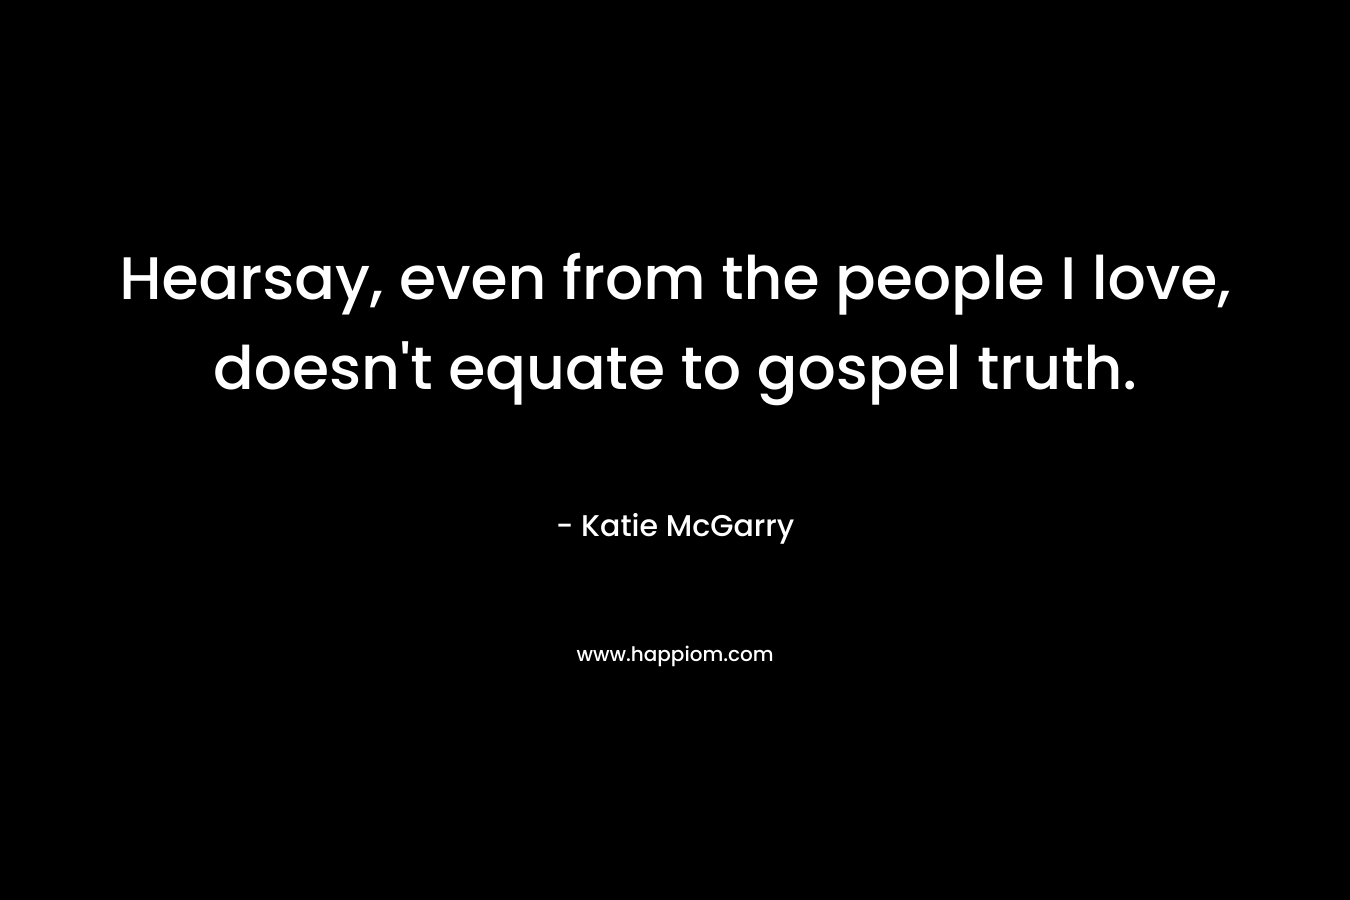 Hearsay, even from the people I love, doesn't equate to gospel truth.